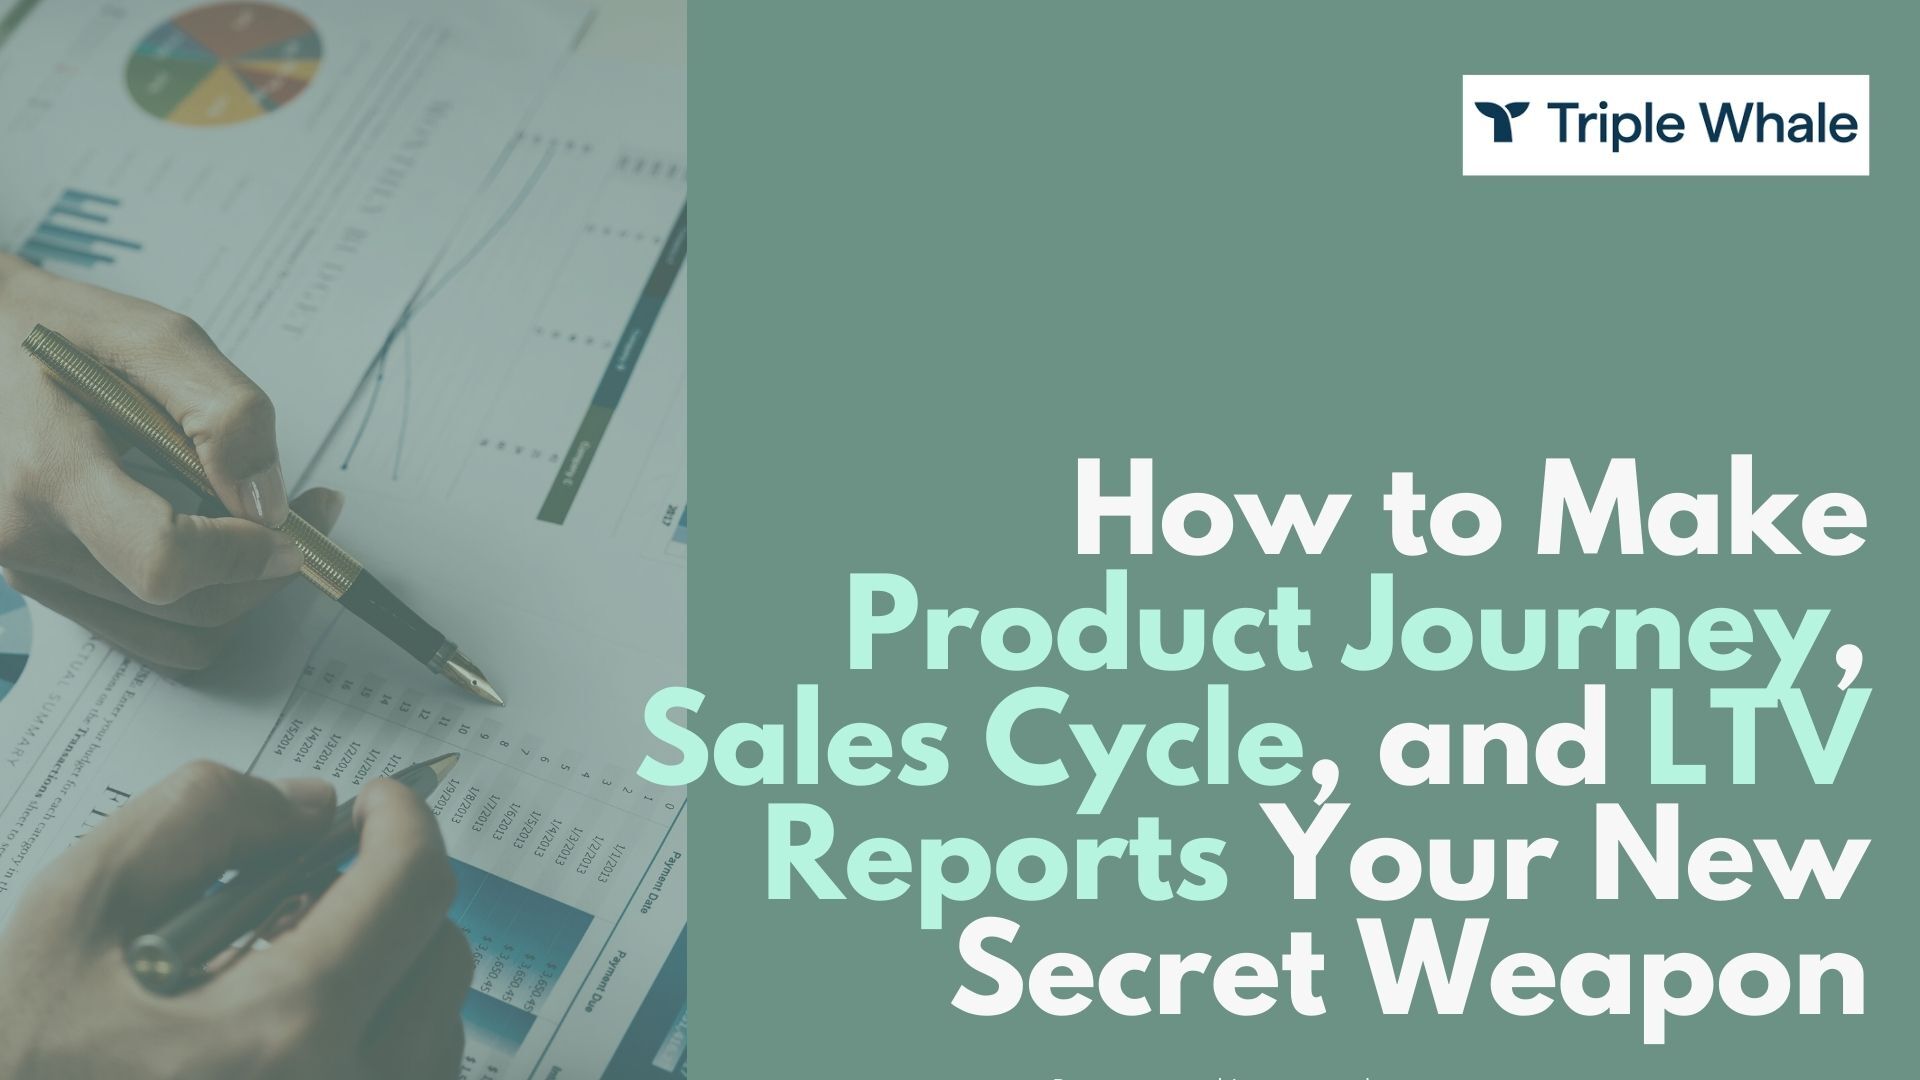 how to make product journey, sales cycle, and ltv reports your new secret weapon